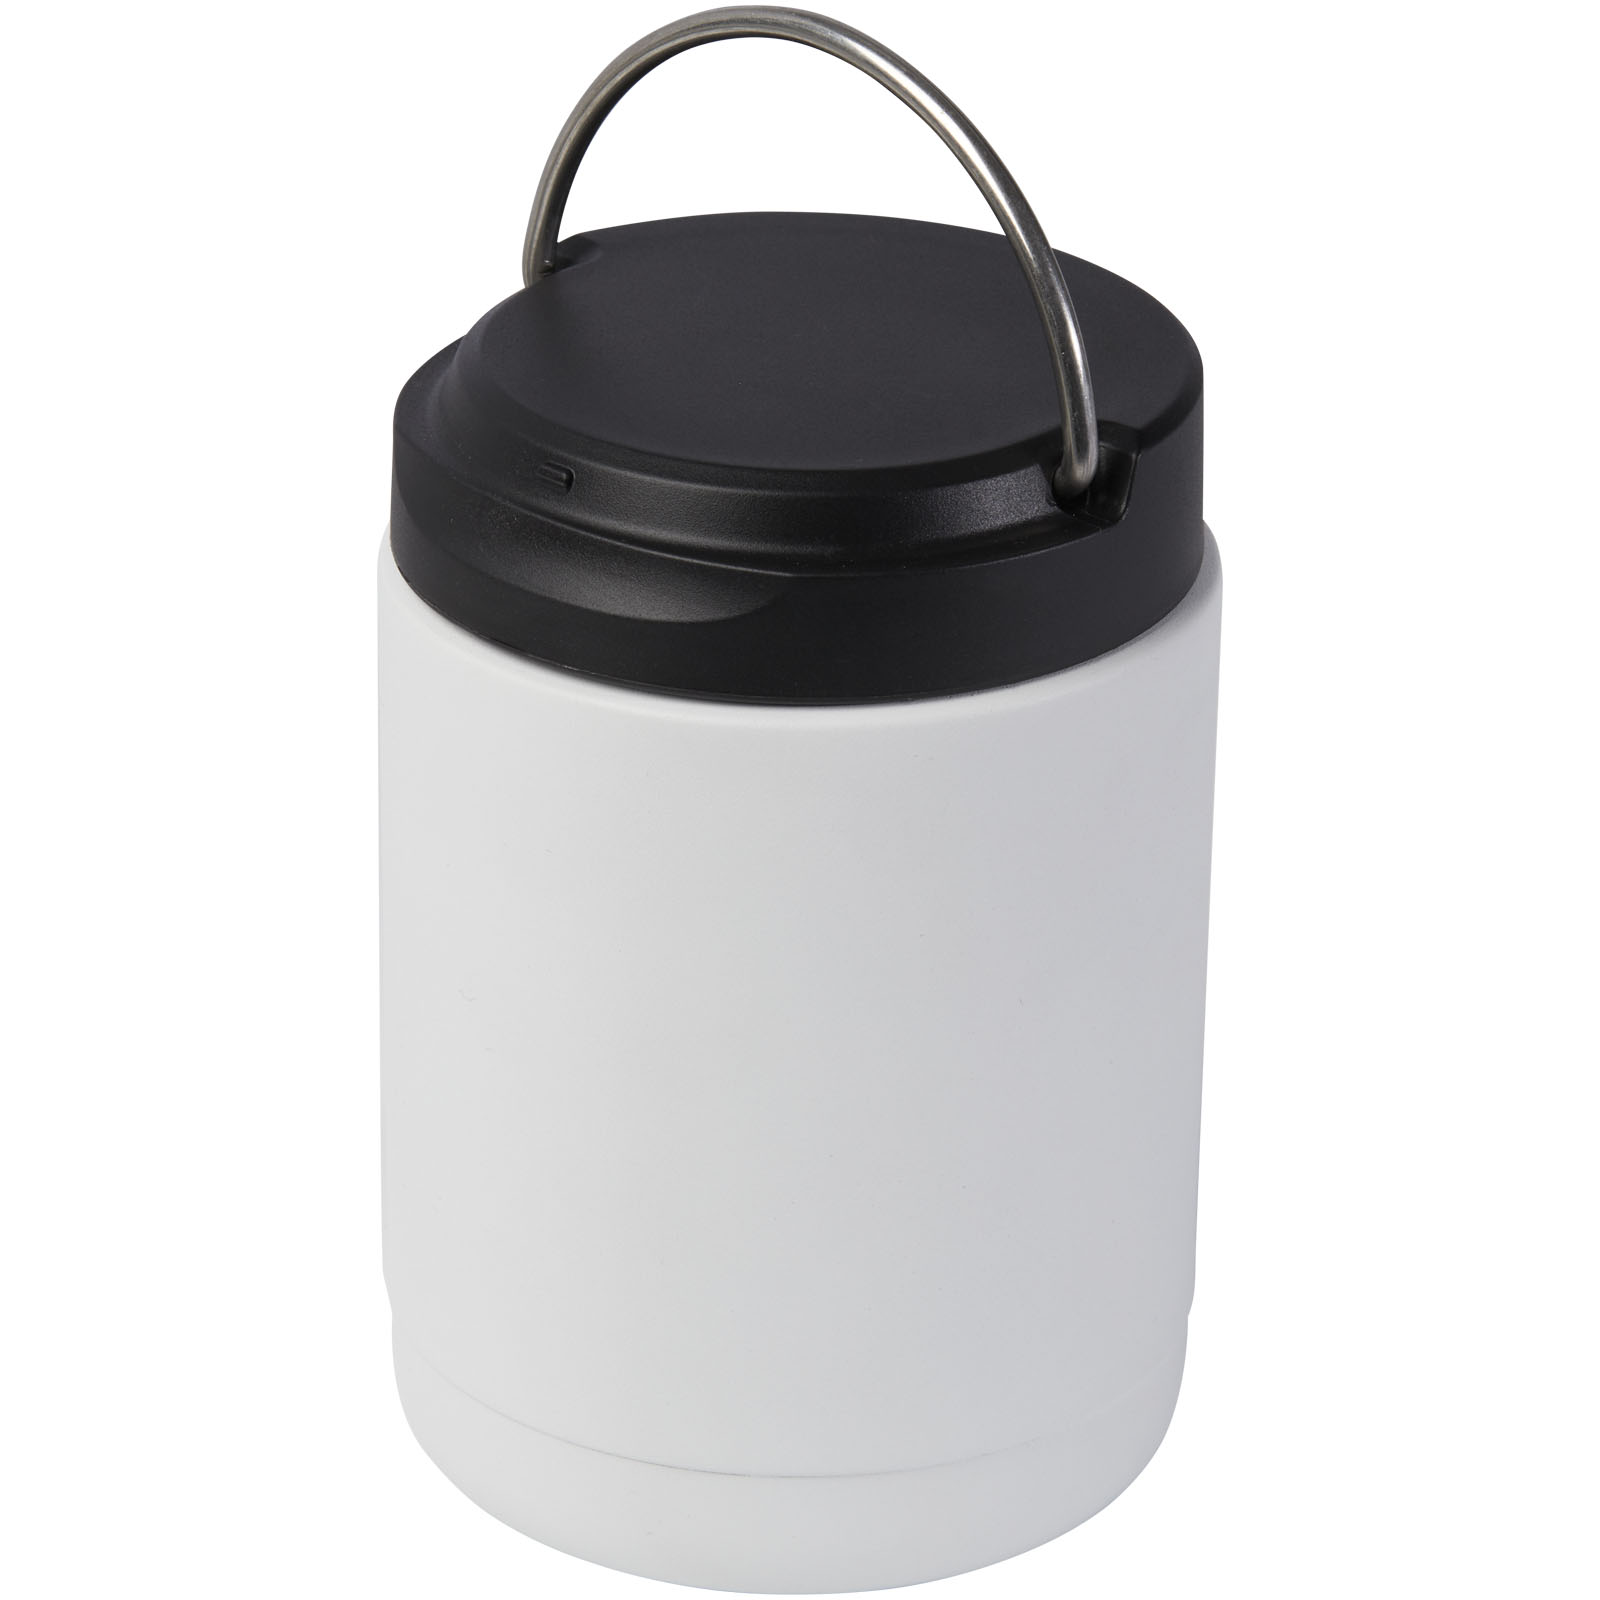 Advertising Lunch Boxes - Doveron 500 ml recycled stainless steel insulated lunch pot - 6